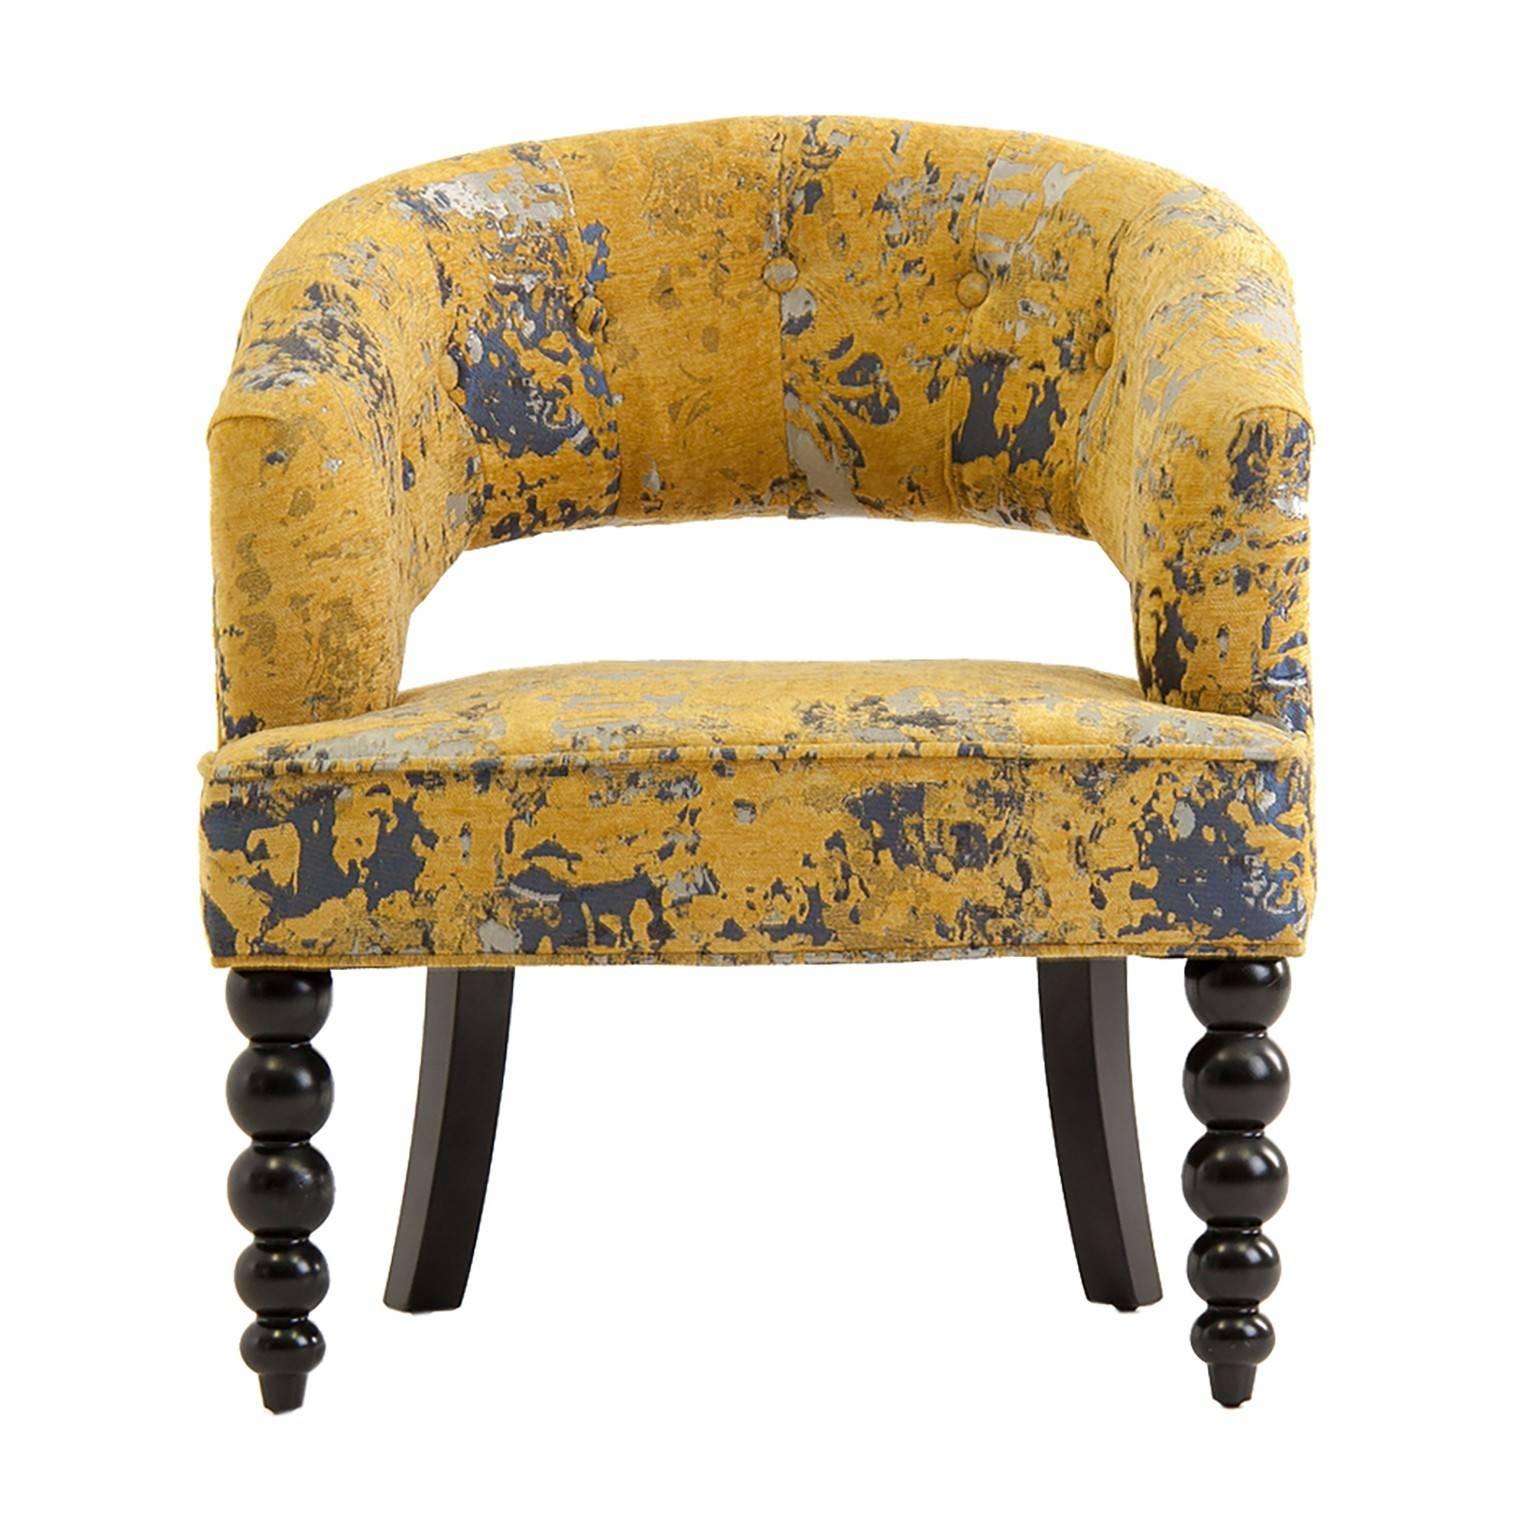 Black Wooden Feet And Yellow Fabric Design Armchair. Adorable, comfortable and original style